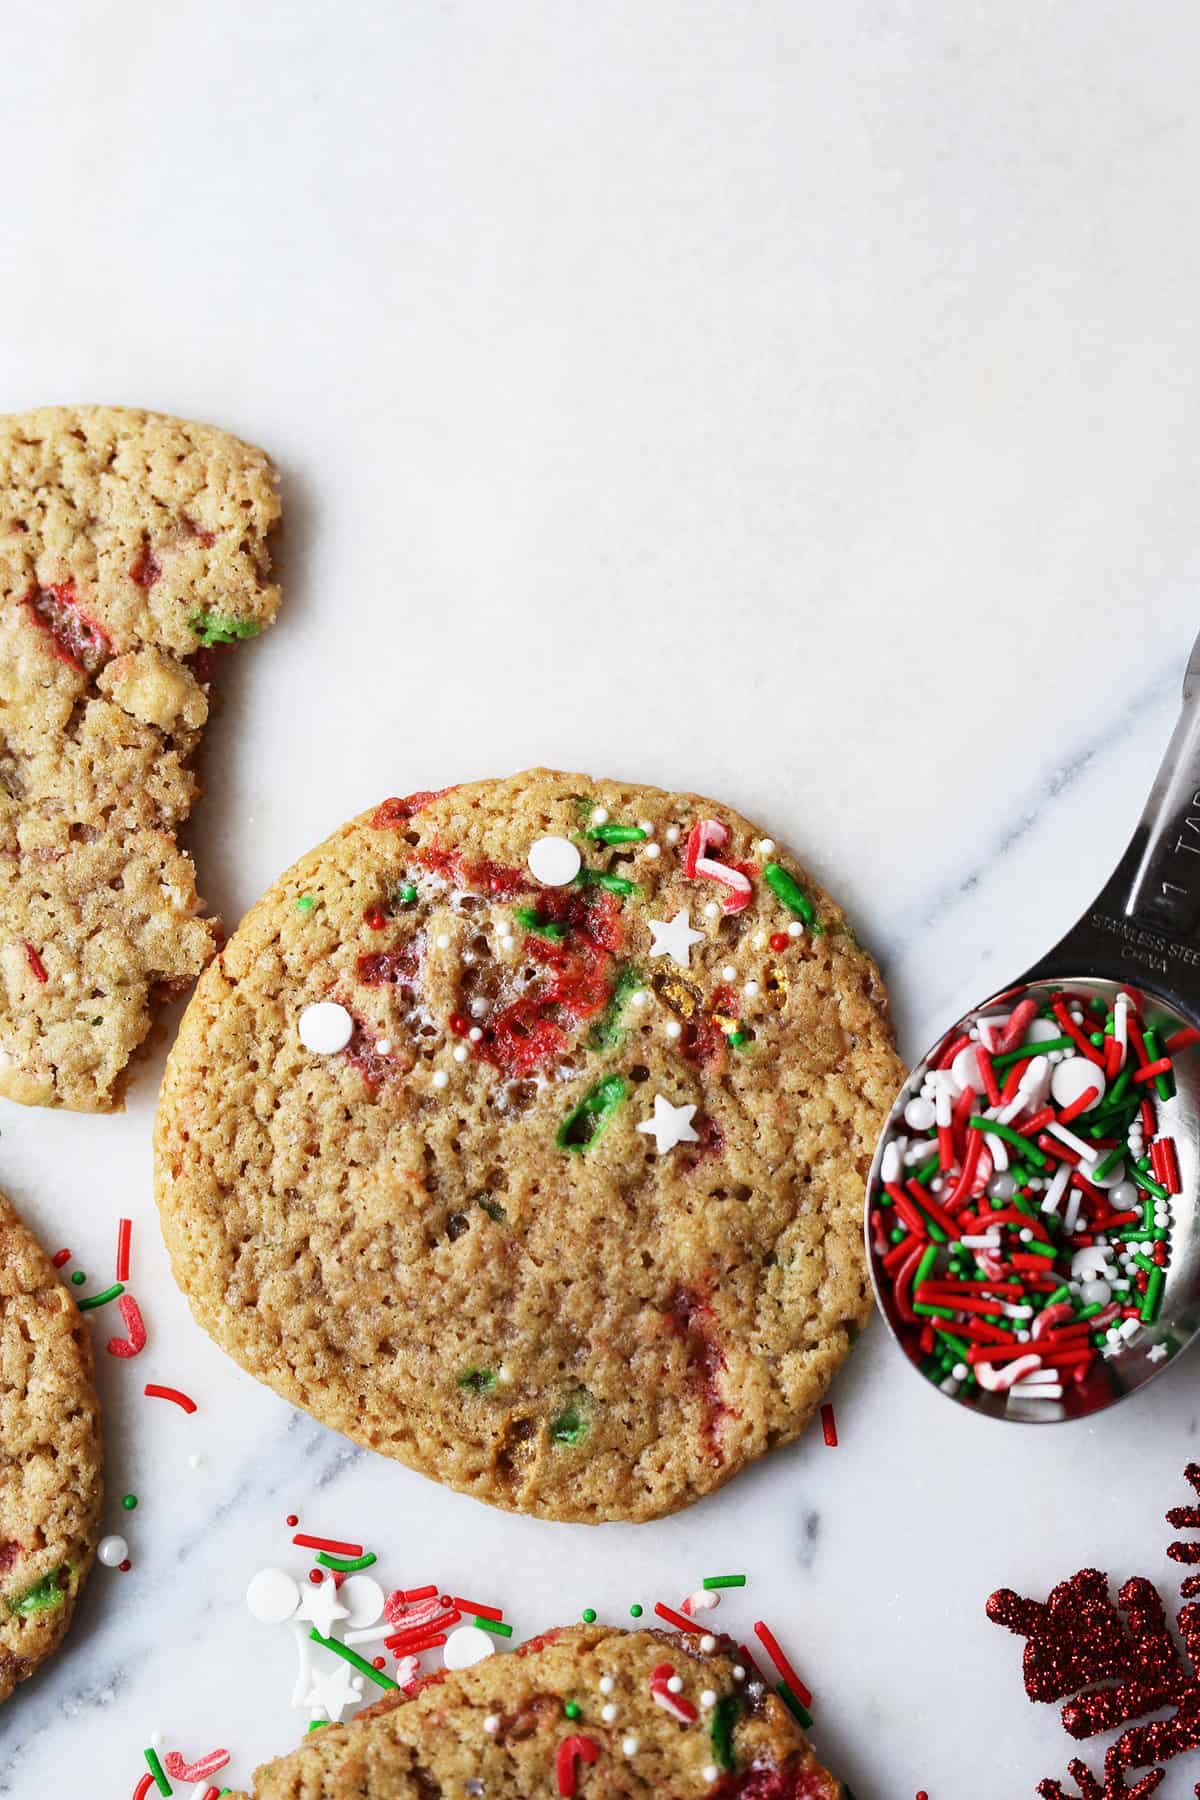 Rudolph’s Chewy Sprinkle Cookies are a reindeer’s favorite gooey chewy cookie and a nice sweet homemade vegan cookie for Santa’s best furry friends! 